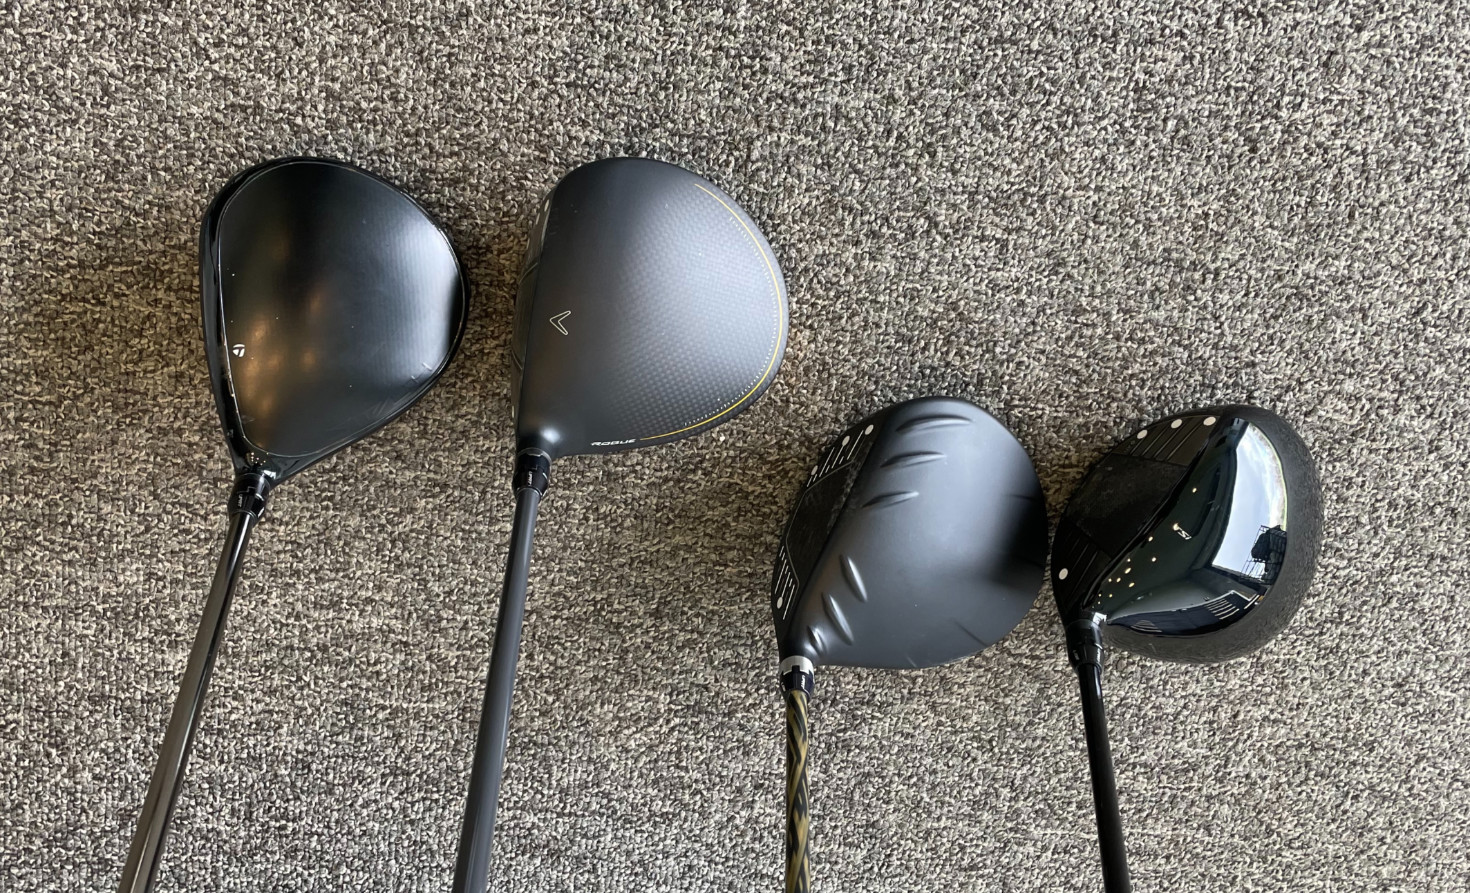 A few of the head and shaft combination I demoed at True Spec Golf.